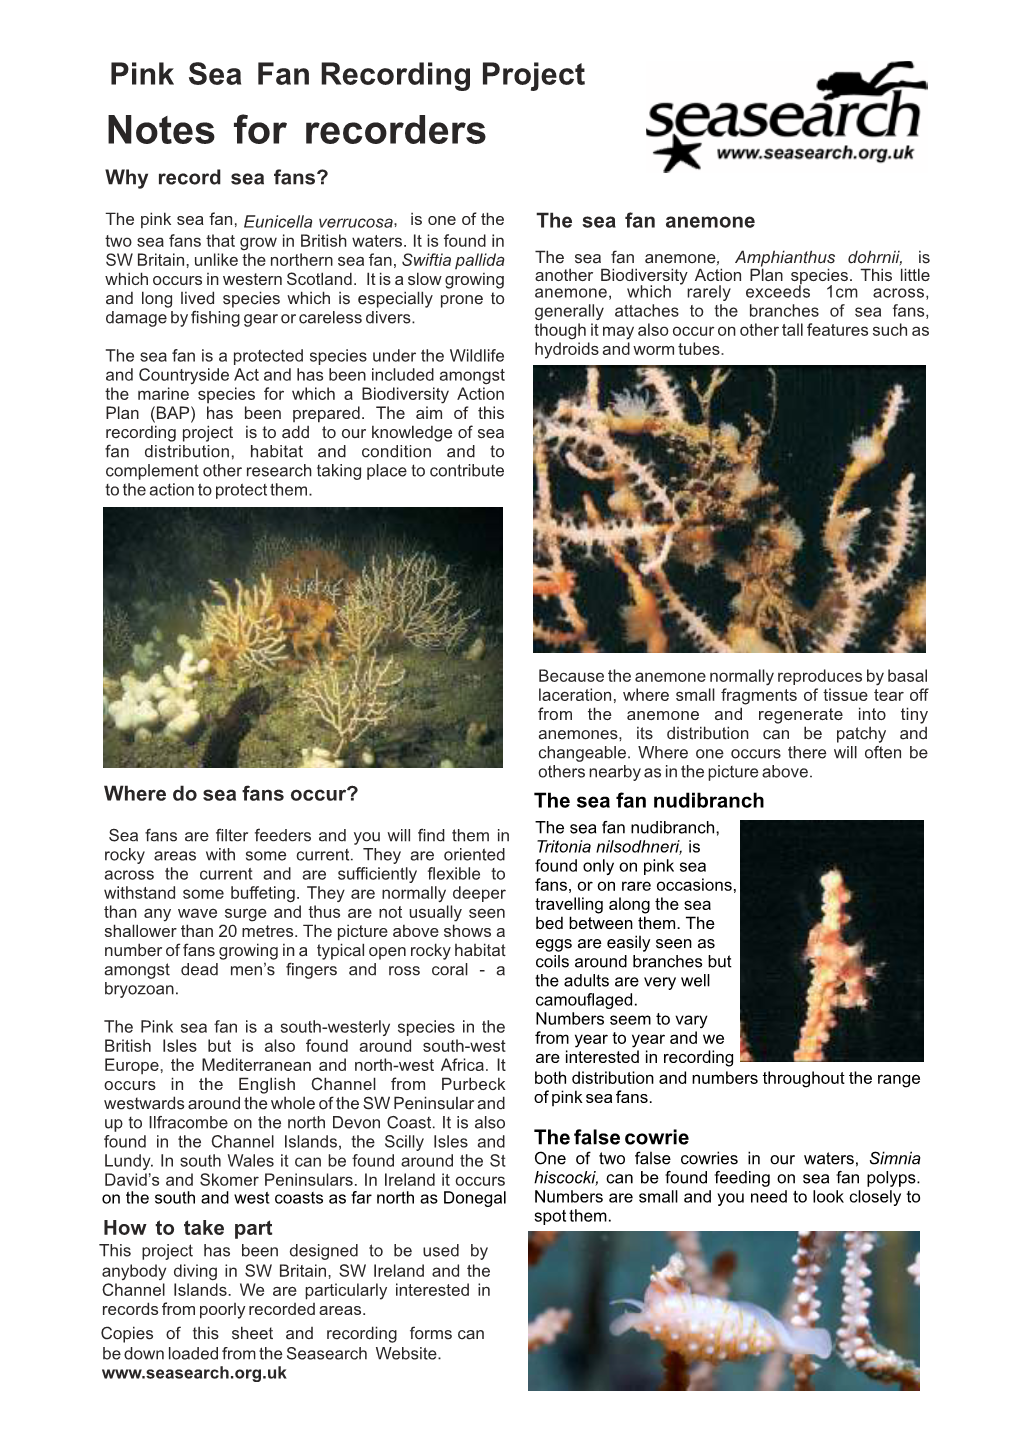 Notes for Recorders Why Record Sea Fans?